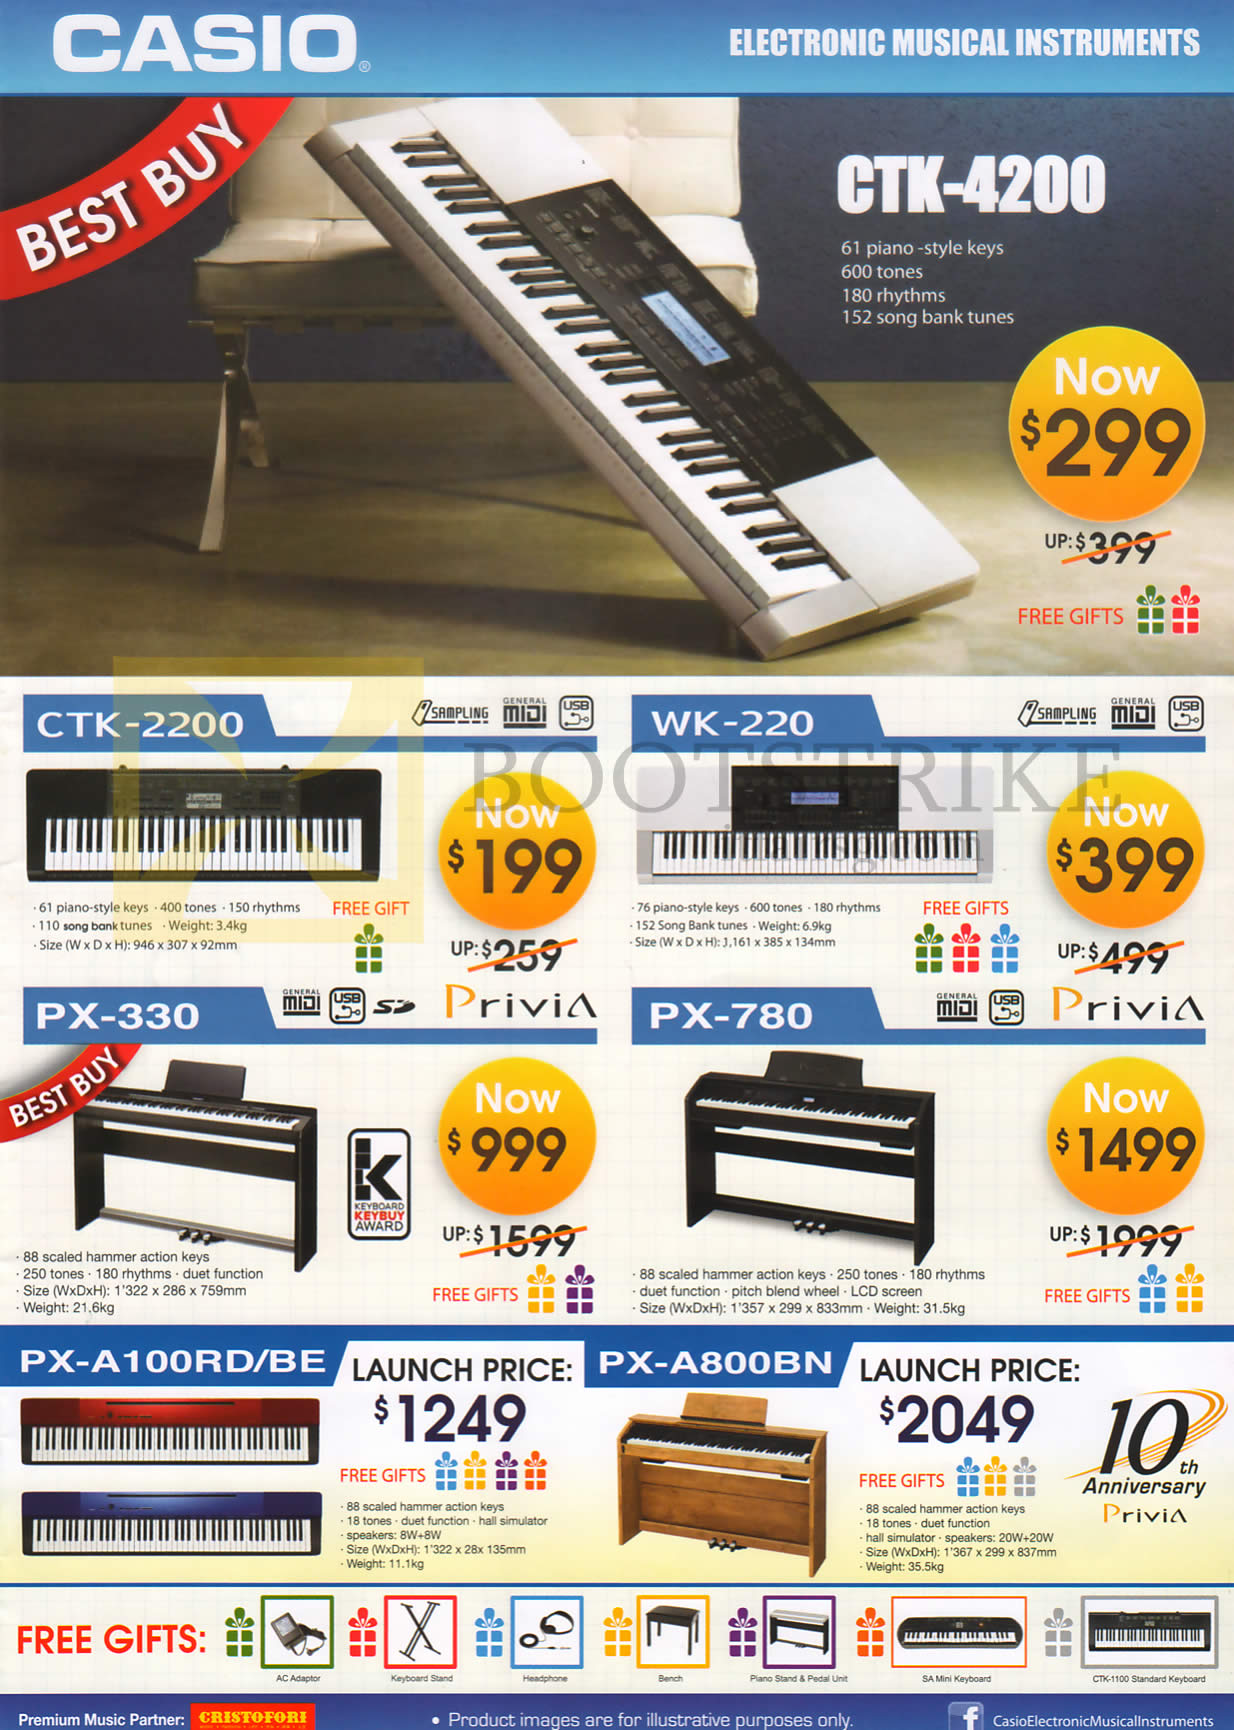 COMEX 2013 price list image brochure of Casio Musical Instruments CTK-2200, WK-220, PX-330, PX-780, PX-A100RD BE, PX-A800BN